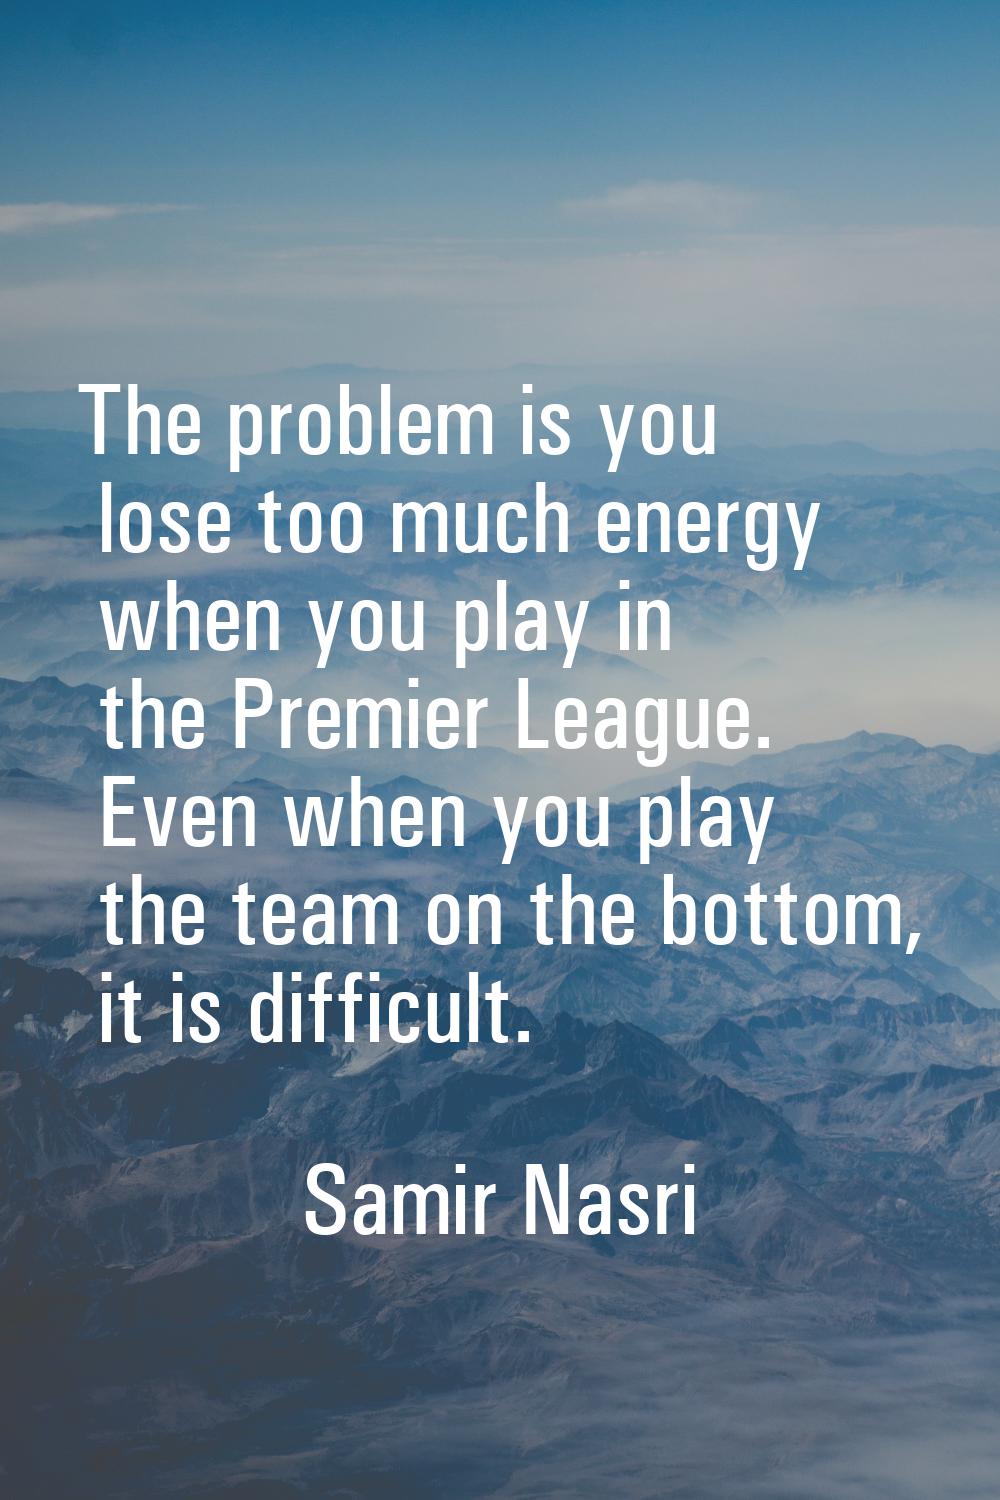 The problem is you lose too much energy when you play in the Premier League. Even when you play the